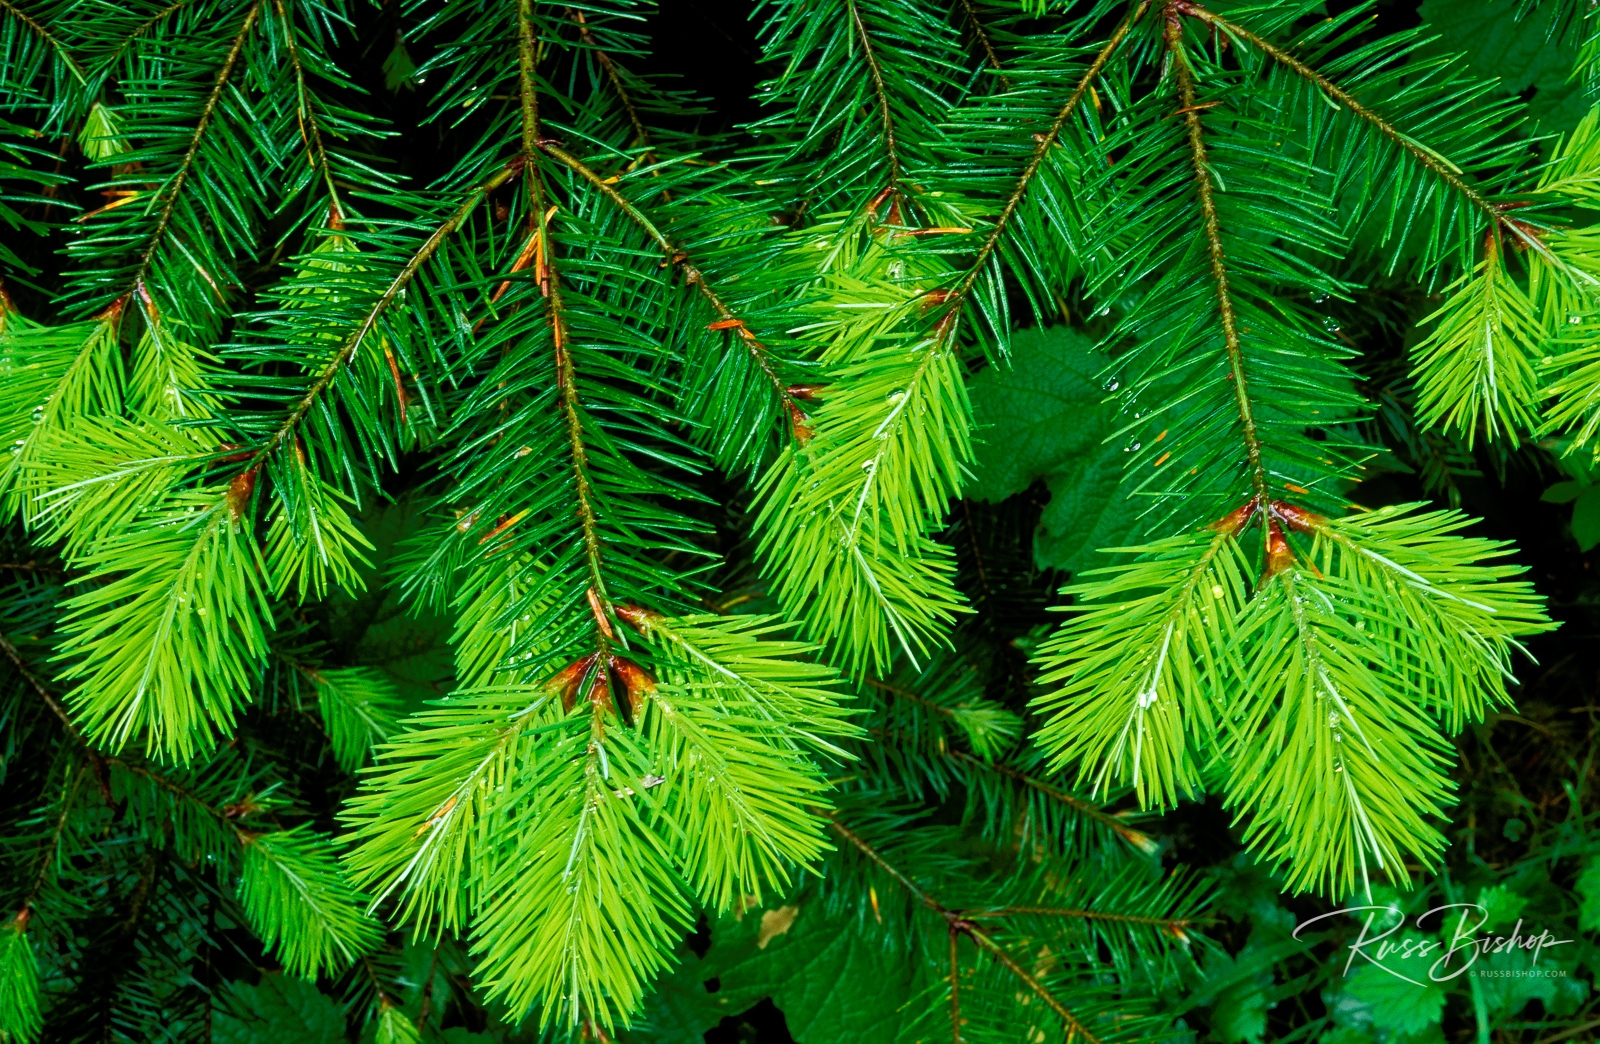 New spring growth on an evergreen branch, Olympic National Park, Washington